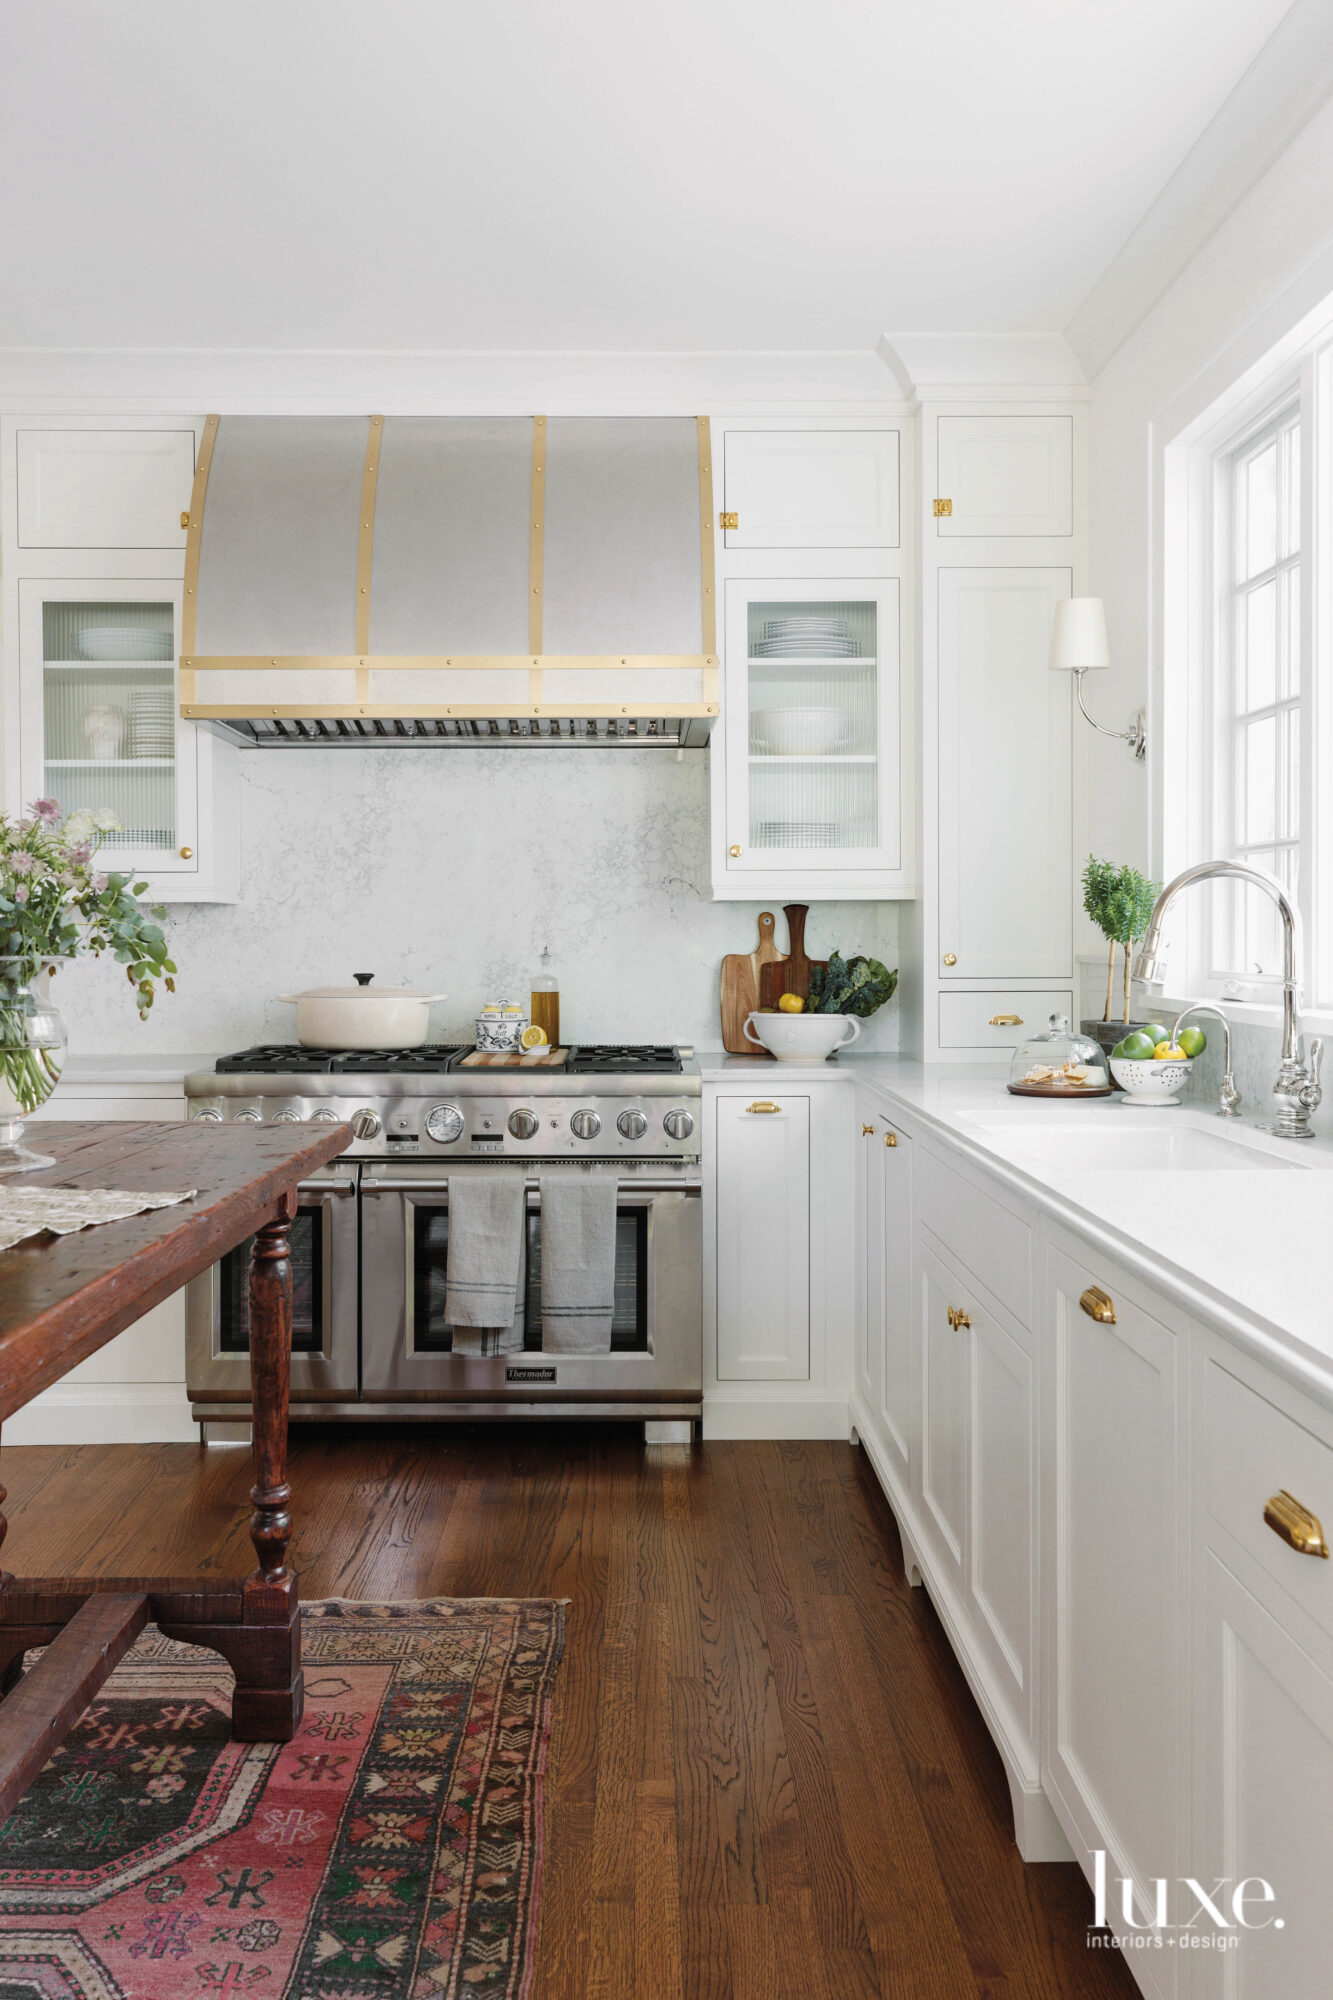 Brass finishes add an industrial touch to this modern country kitchen